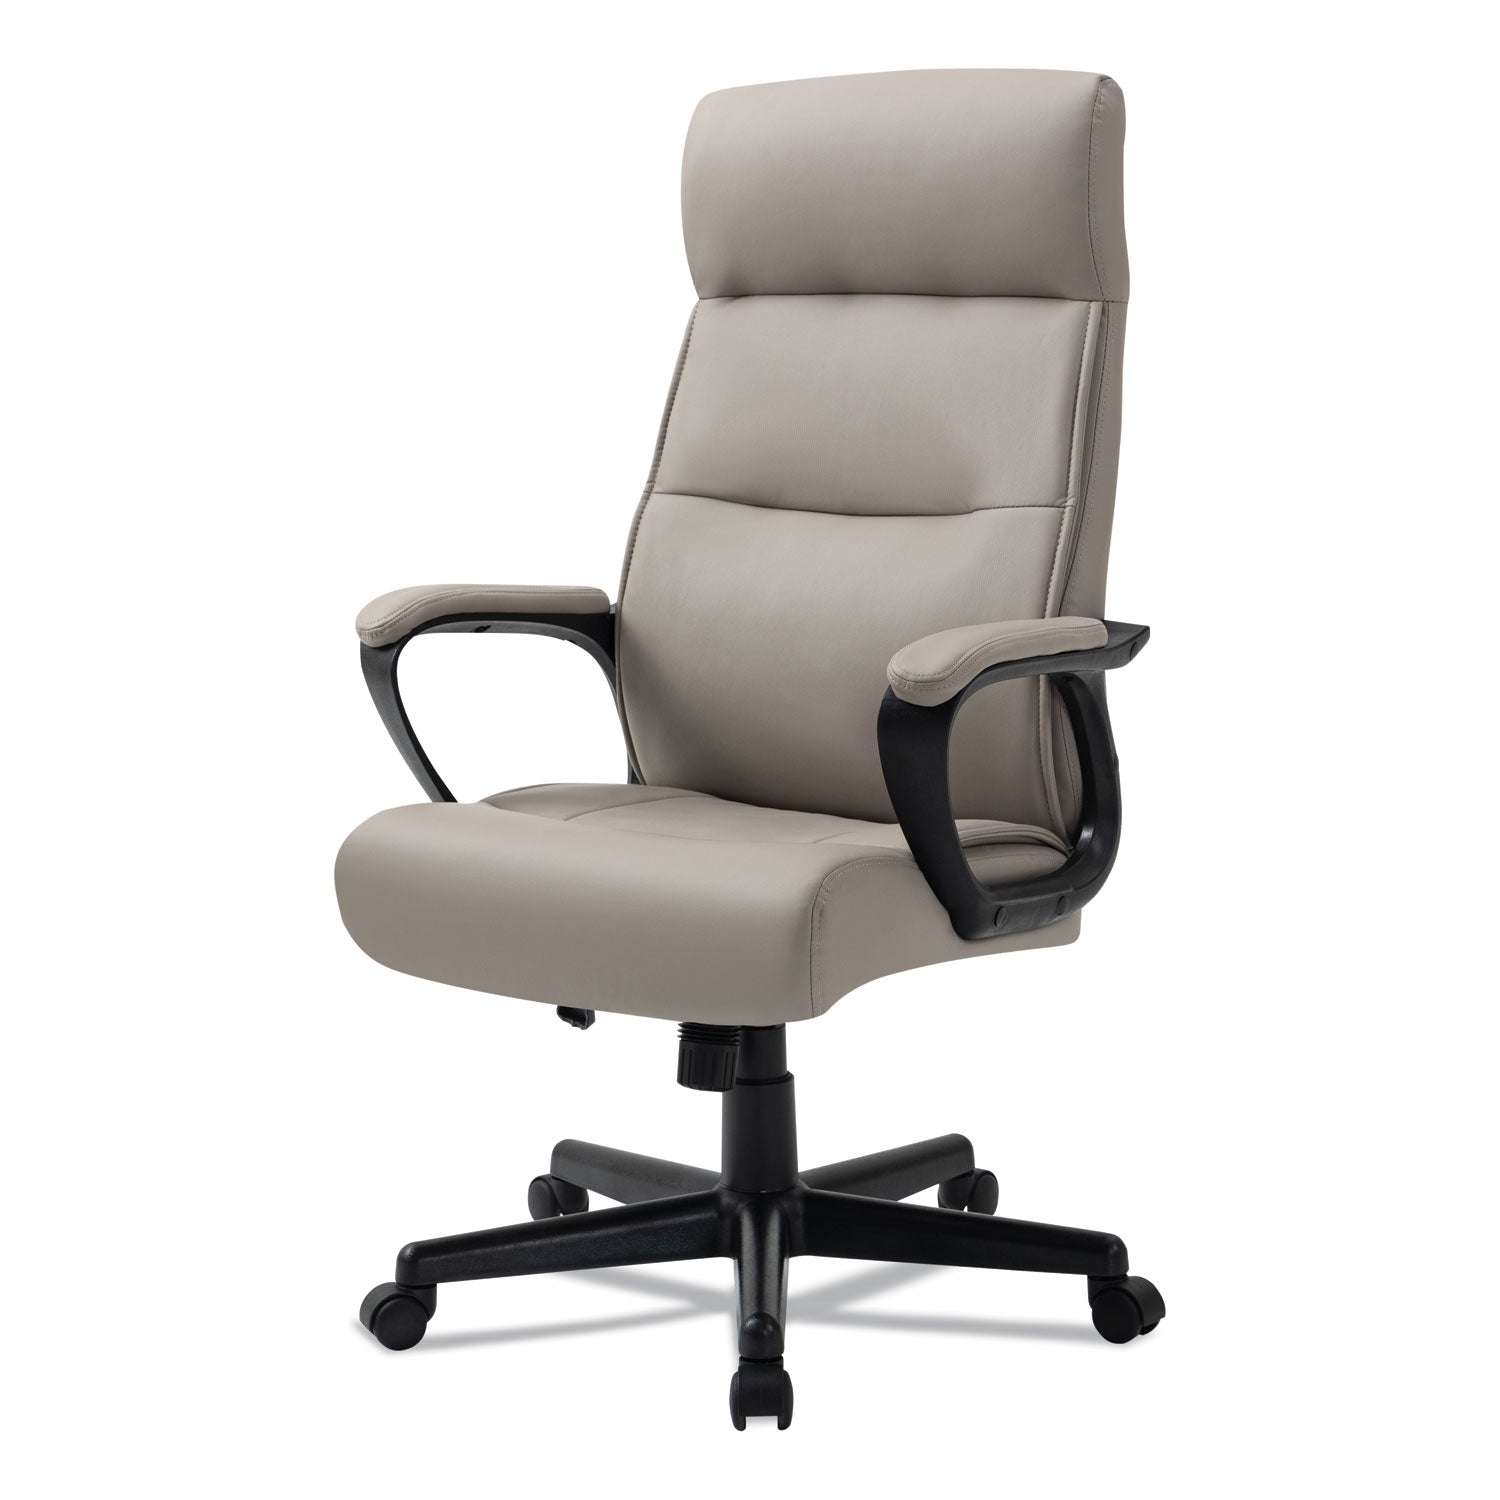 alera-oxnam-series-high-back-task-chair-supports-up-to-275-lbs-1756-to-2138-seat-height-tan-seat-back-black-base_aleon41b59 - 3